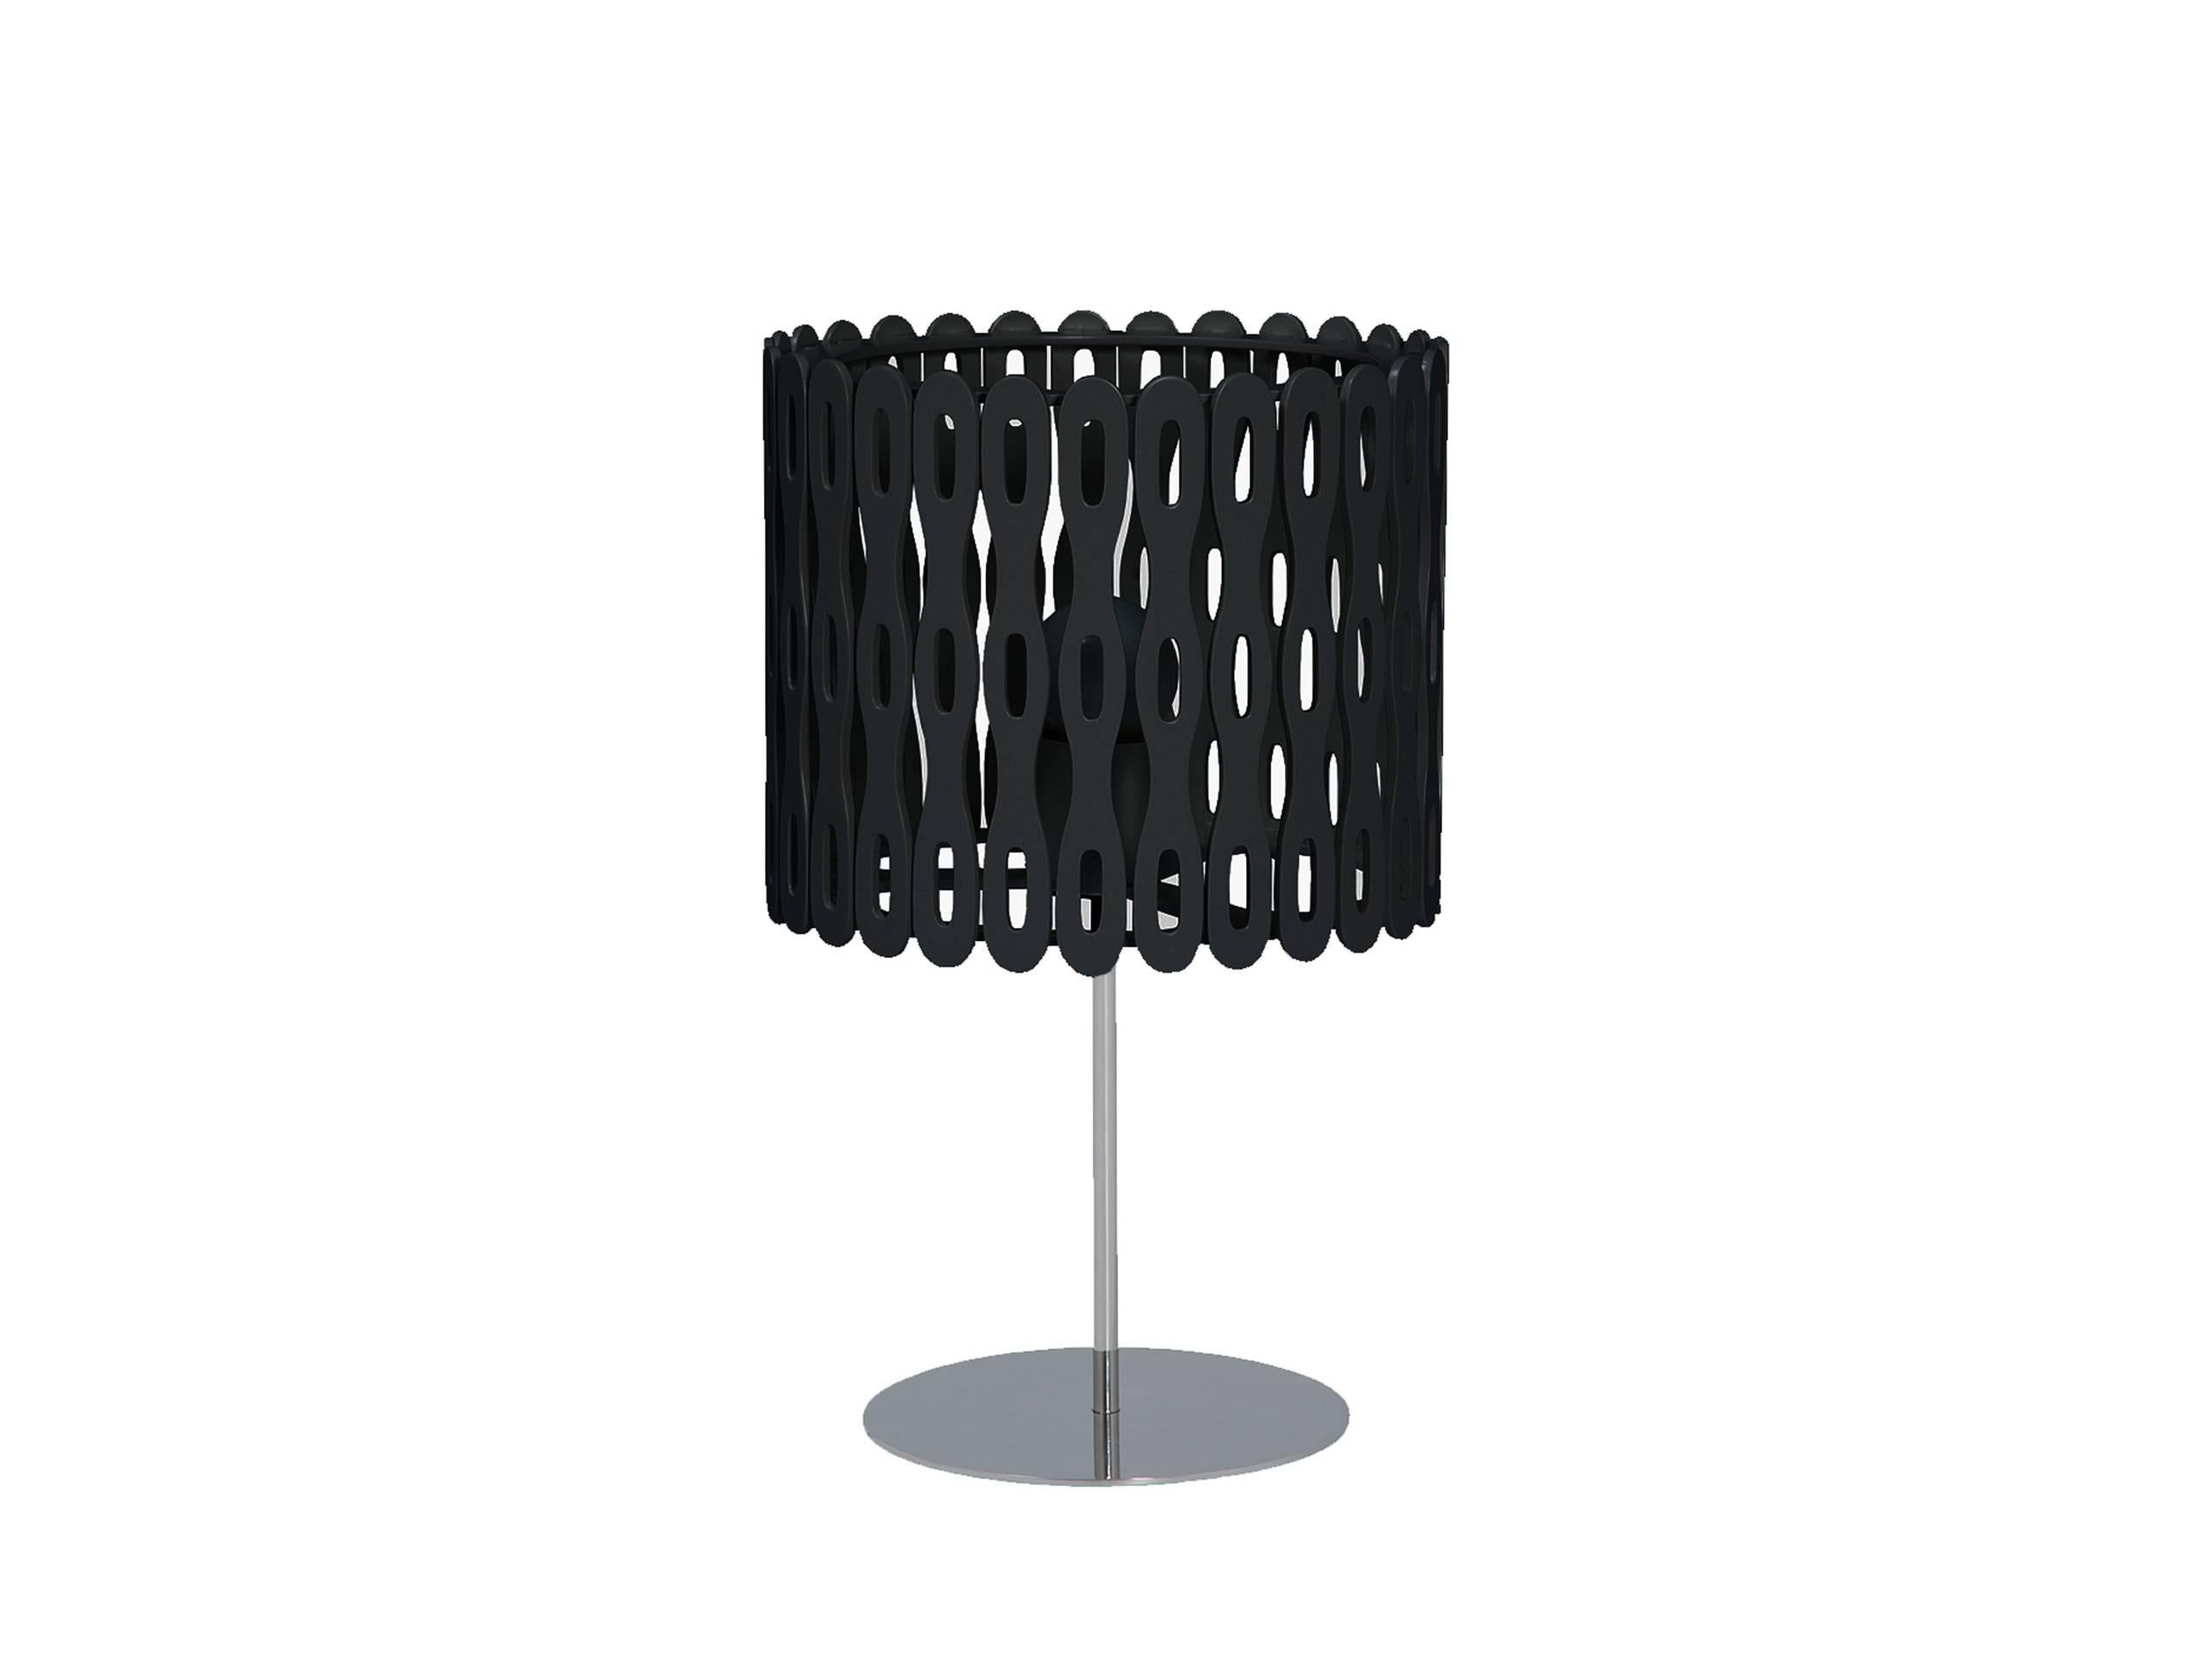 Arpoador Brazilian Contemporary Graphic Pattern Cut Wood Table Lamp by Lattoog 1